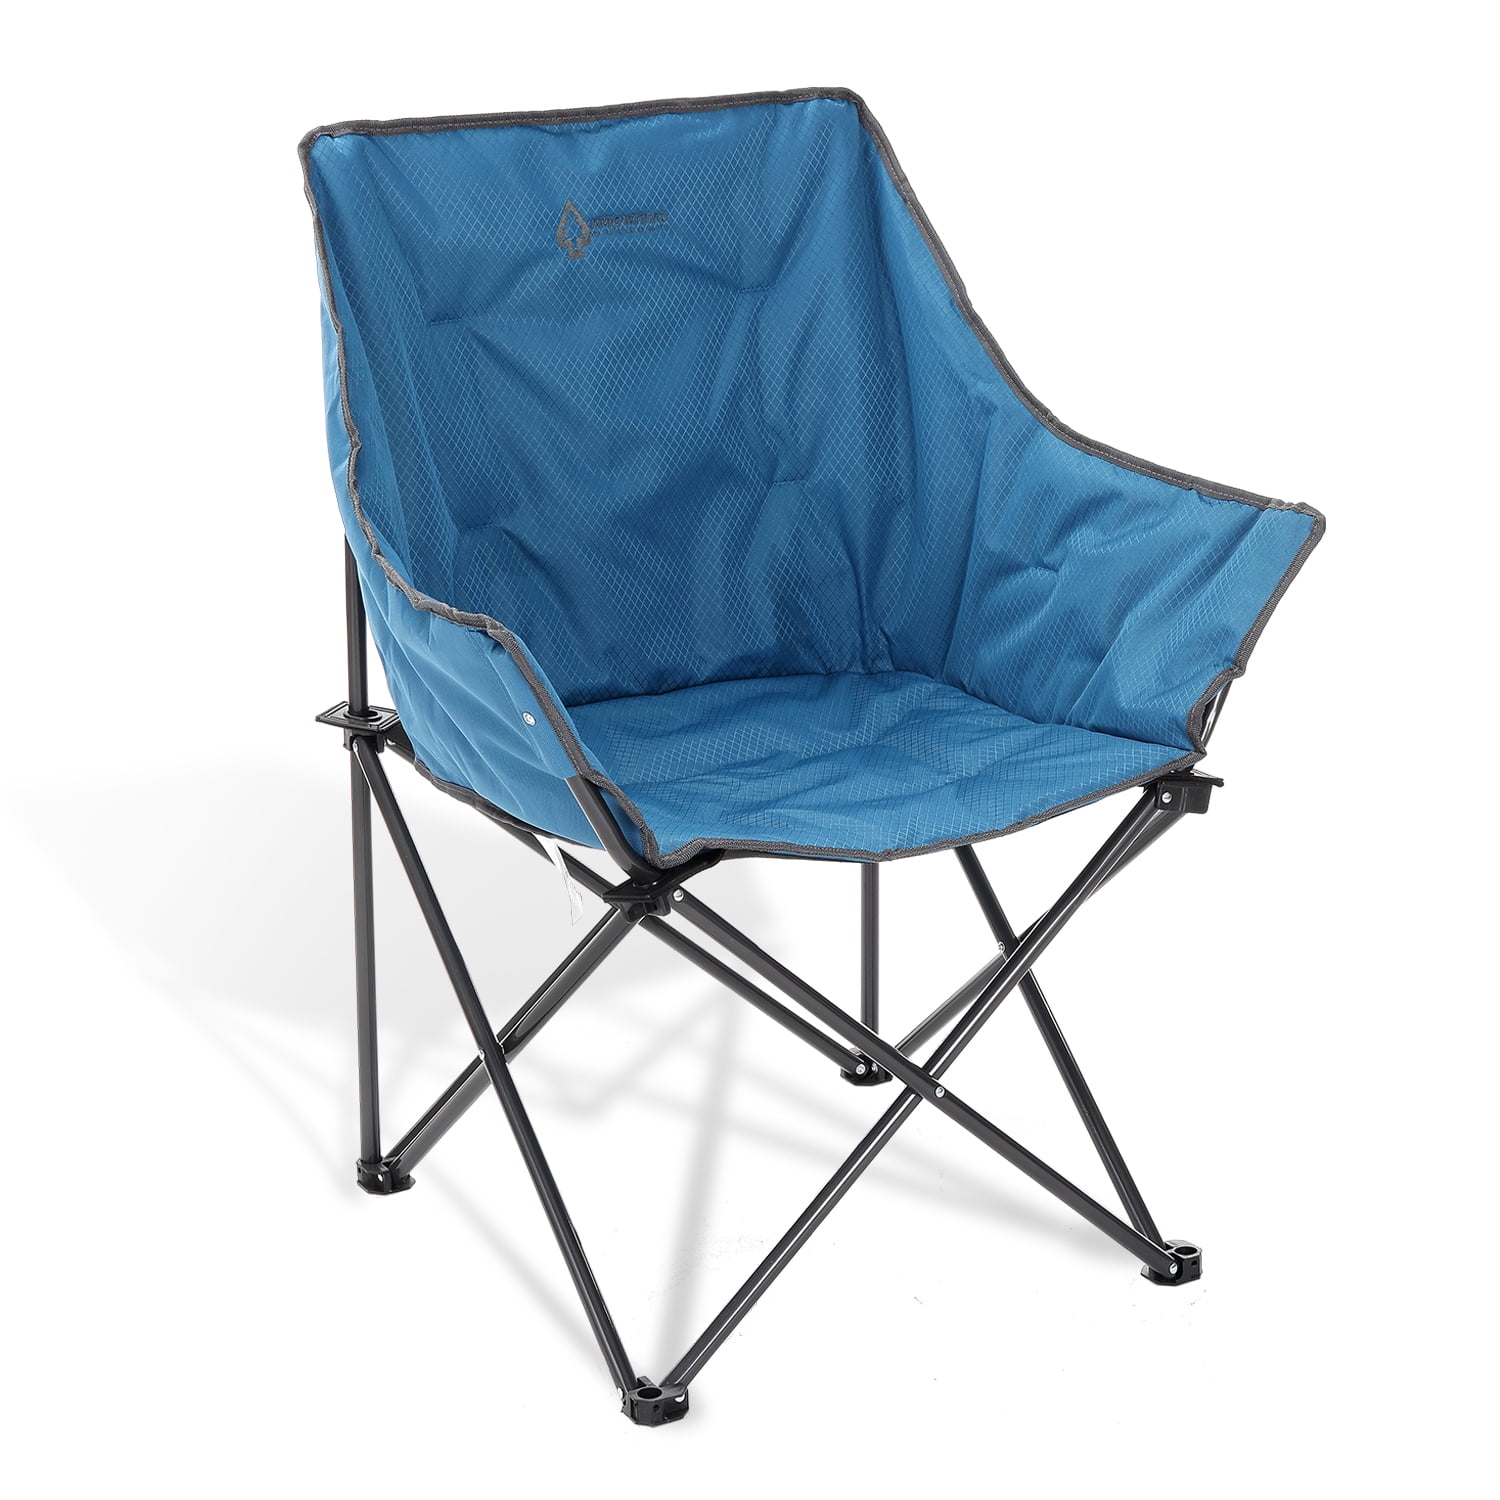 Portable Camping Chair, Outdoor Backpacking Chairs, Compact 